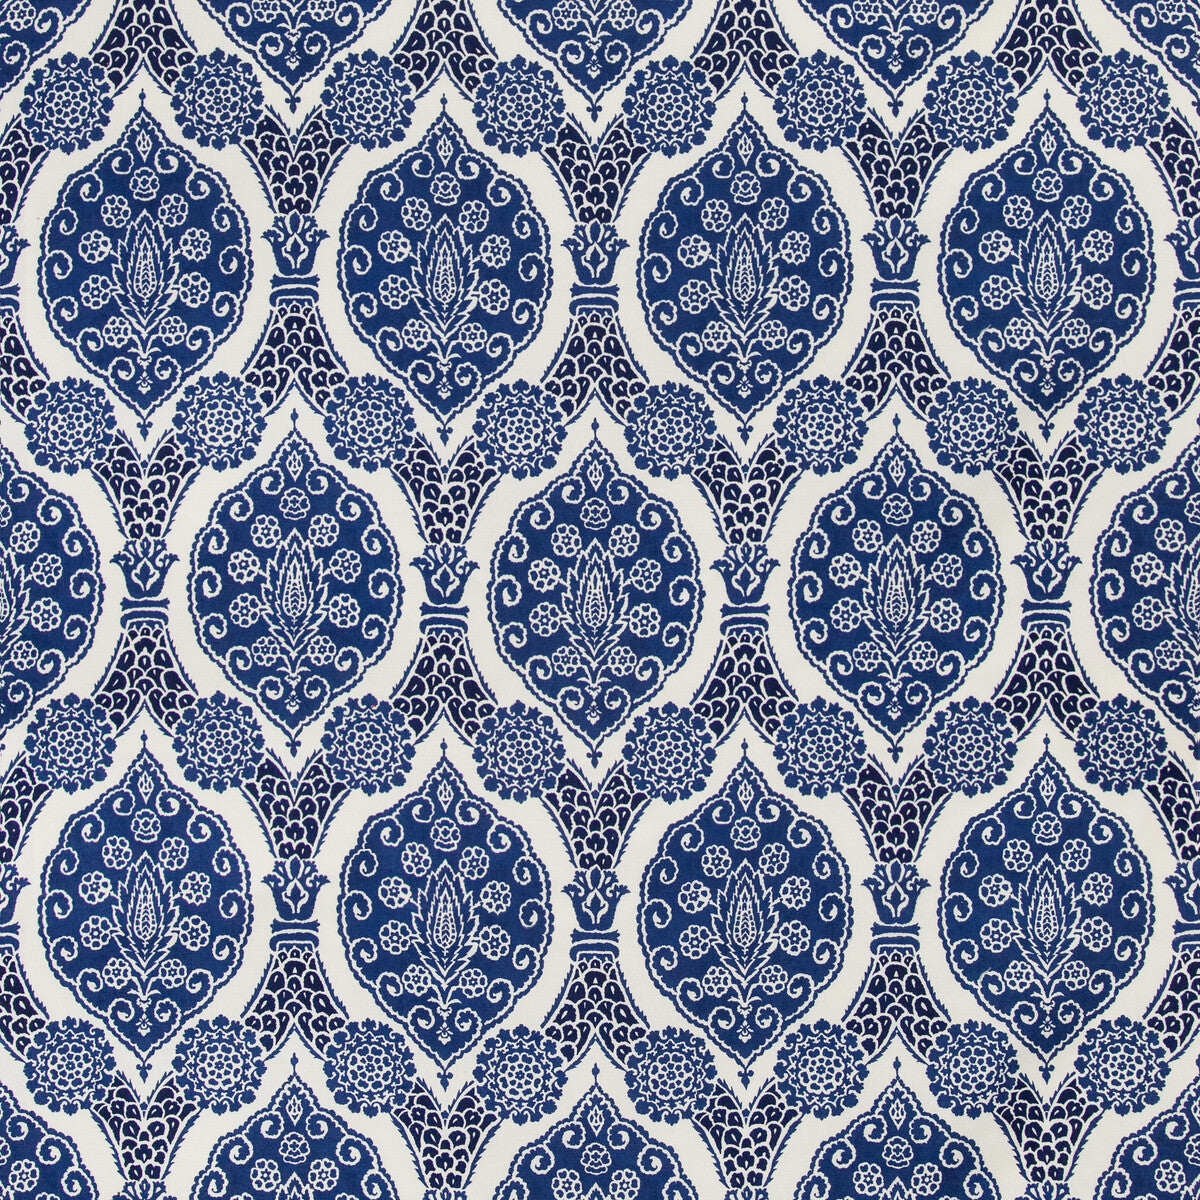 Sufera Print fabric in indigo color - pattern 8020103.50.0 - by Brunschwig &amp; Fils in the Grand Bazaar collection